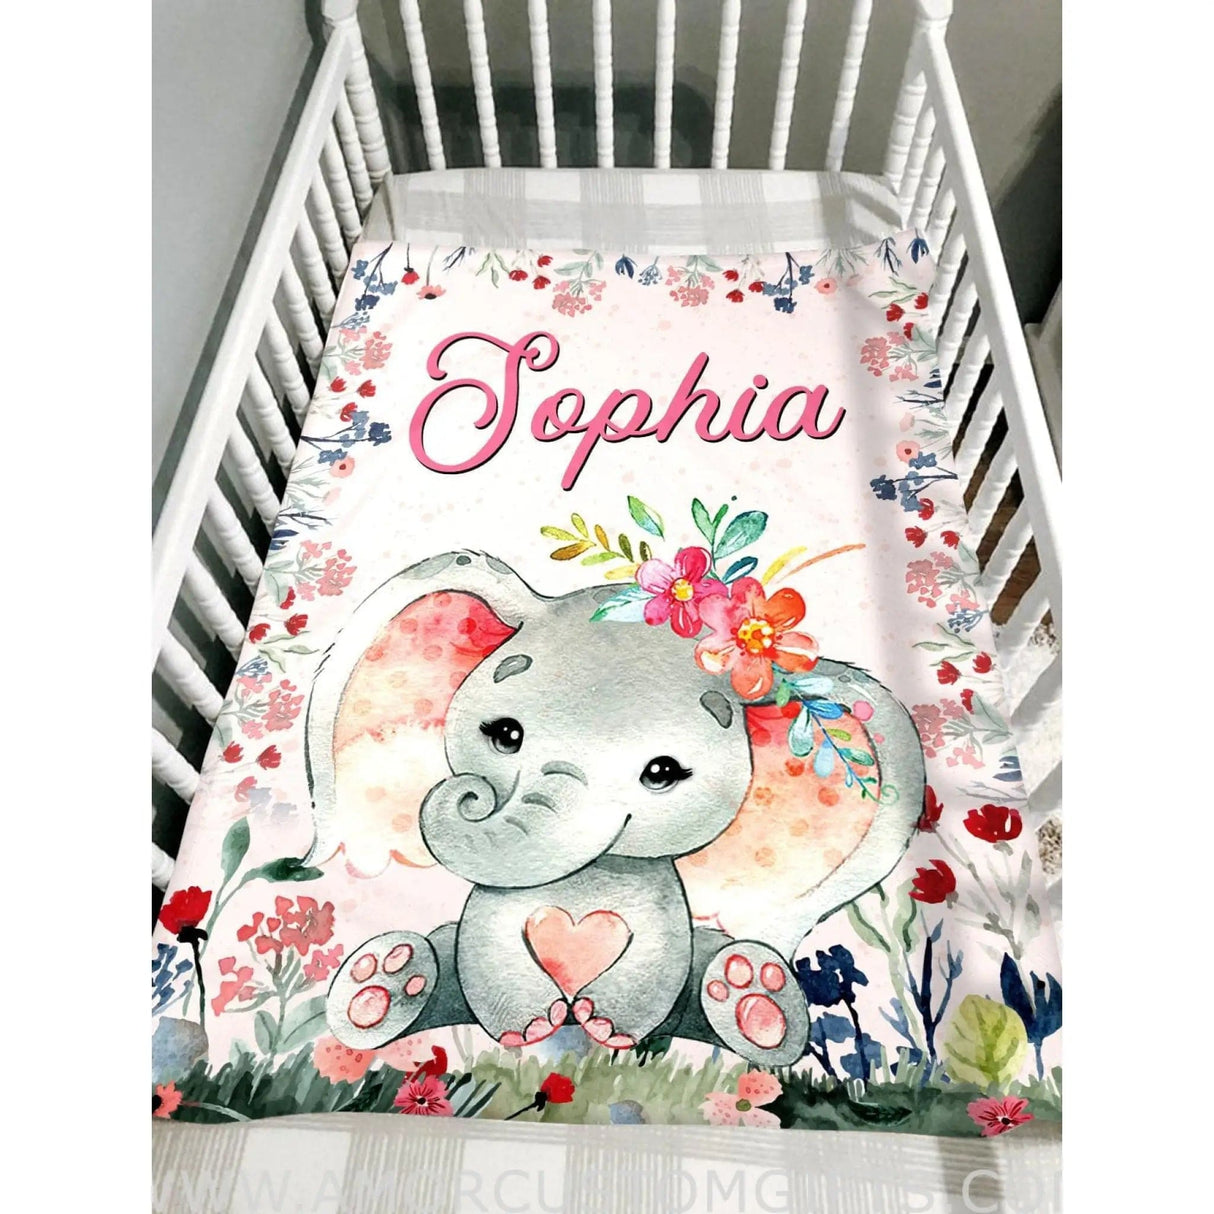 Blankets USA MADE Personalized Baby Blanket For Daughter, Cute Elephant & Colorful Flower Printed Custom Name Baby Reveal Blanket